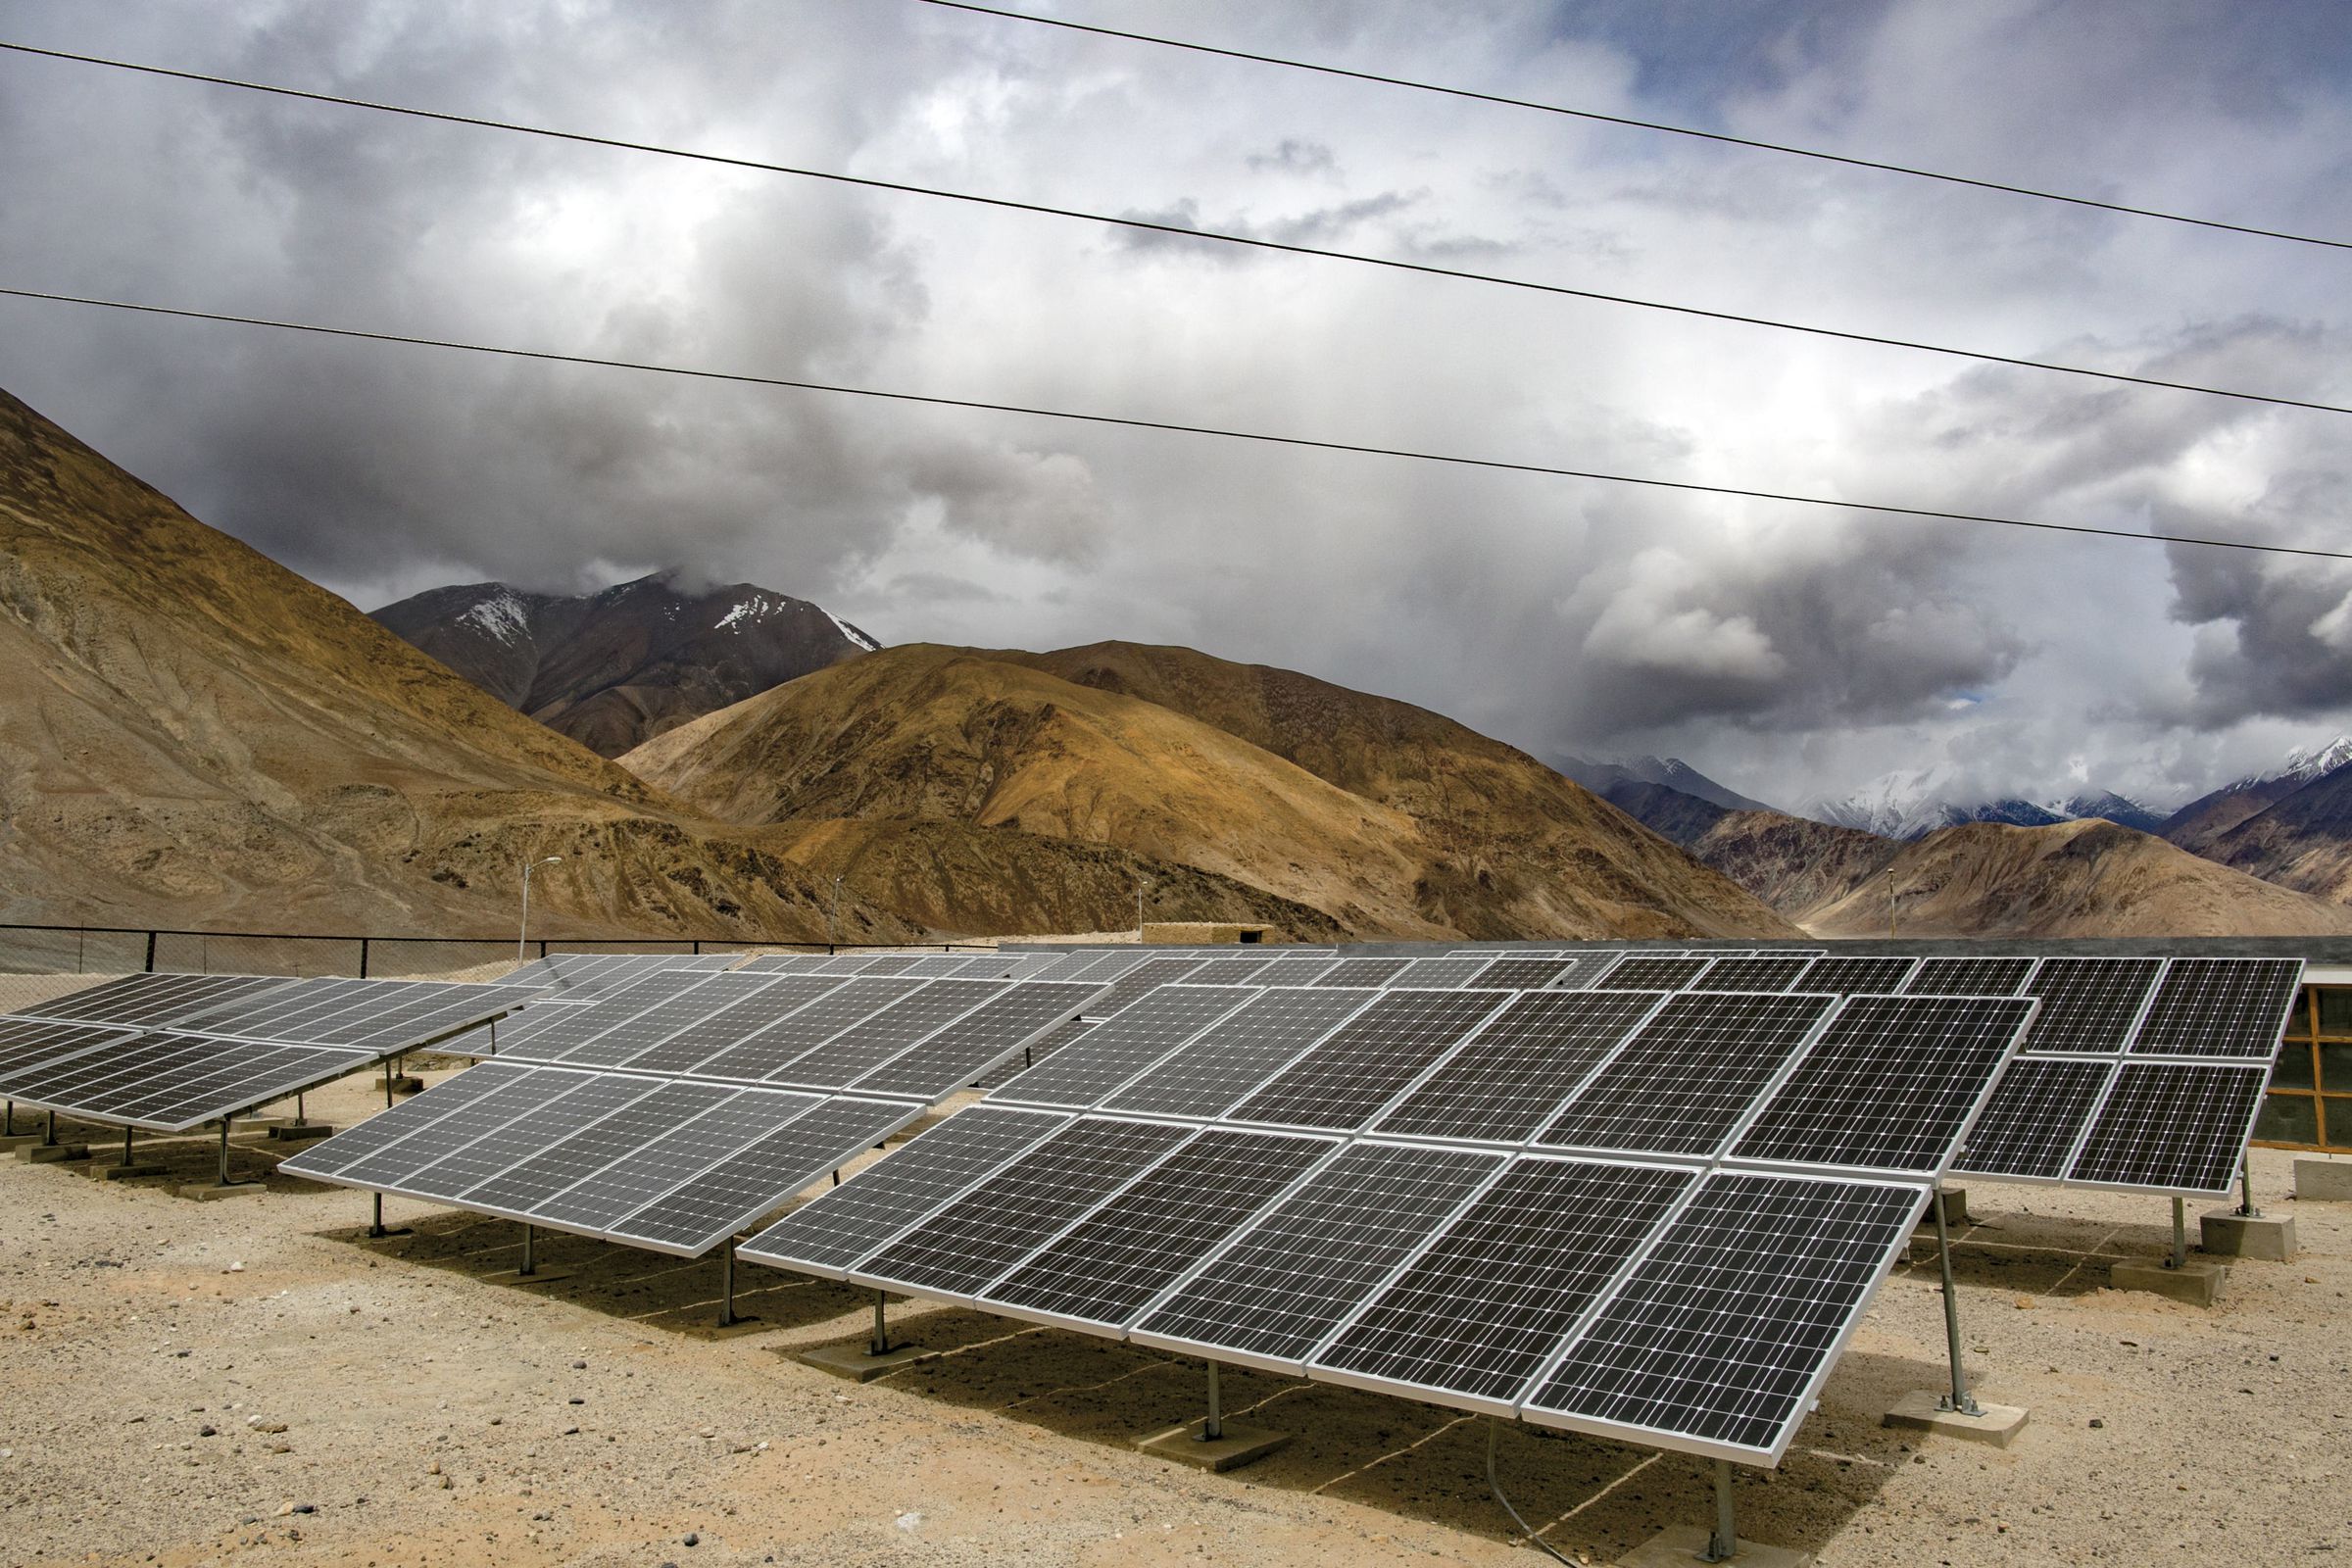 Solar Power Looks To Expand At India's Remote Ladakh Region